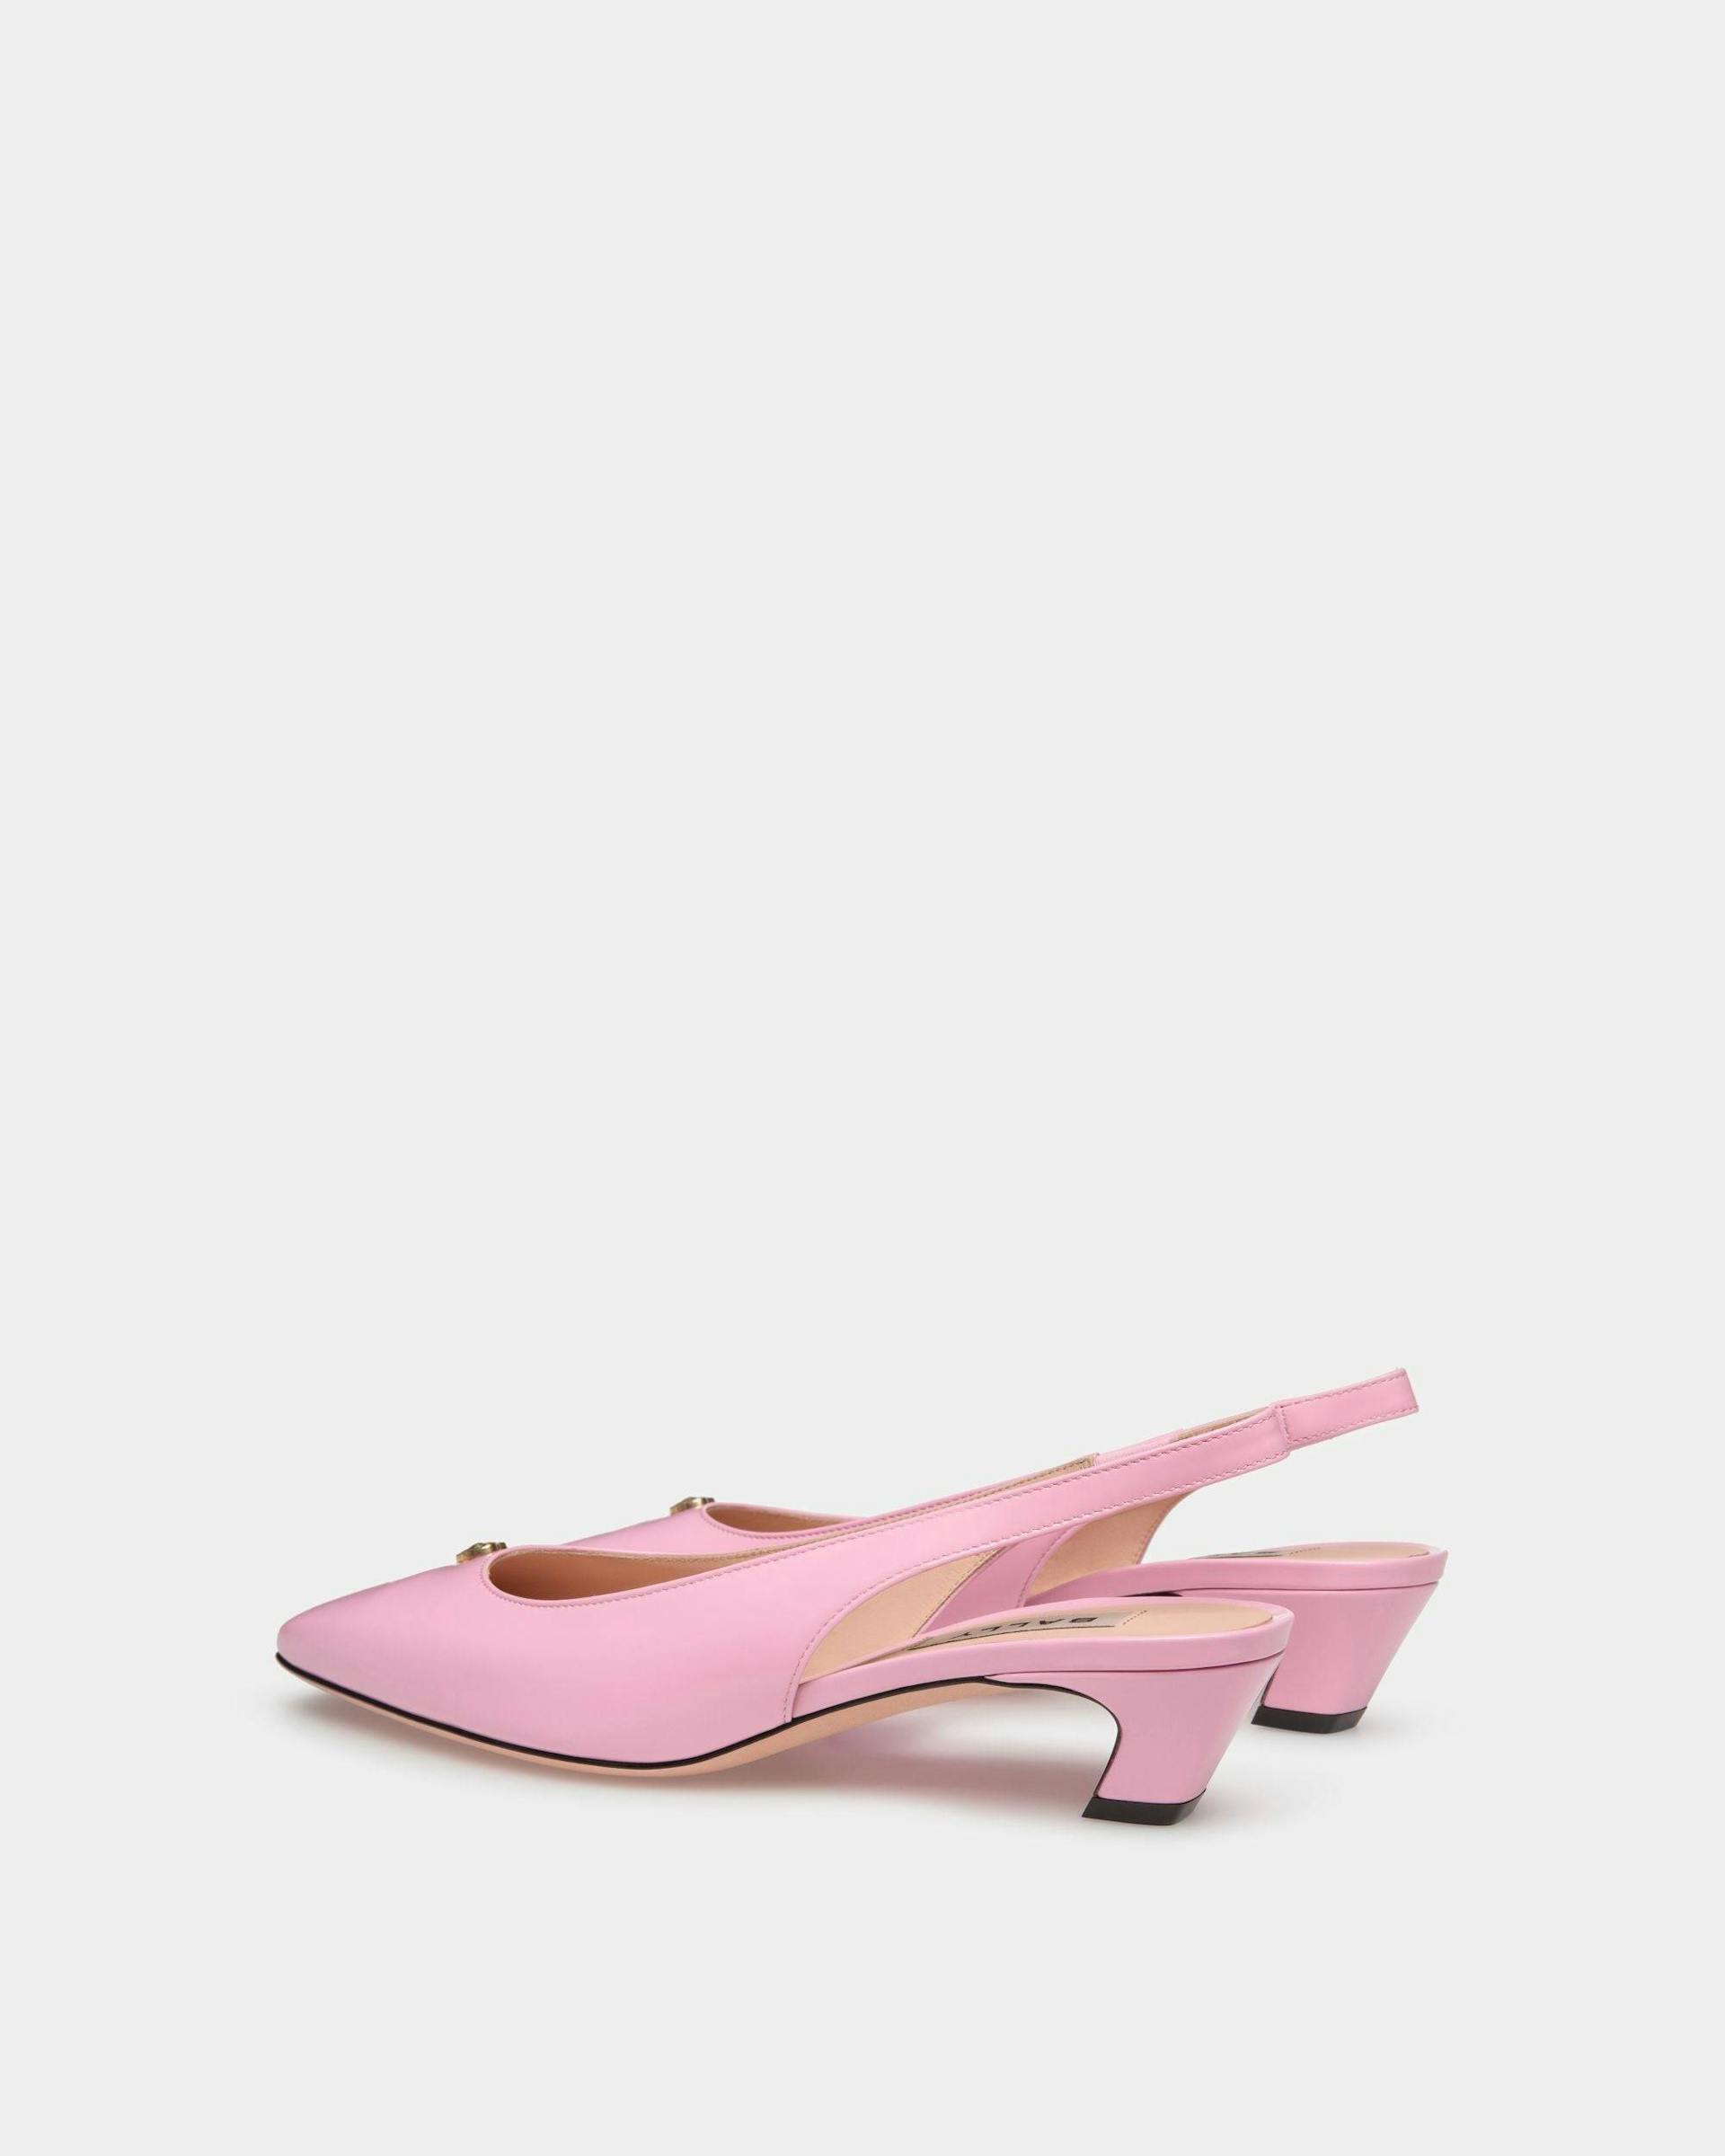 Women's Sylt Slingback Pump In Pink Leather | Bally | Still Life 3/4 Back